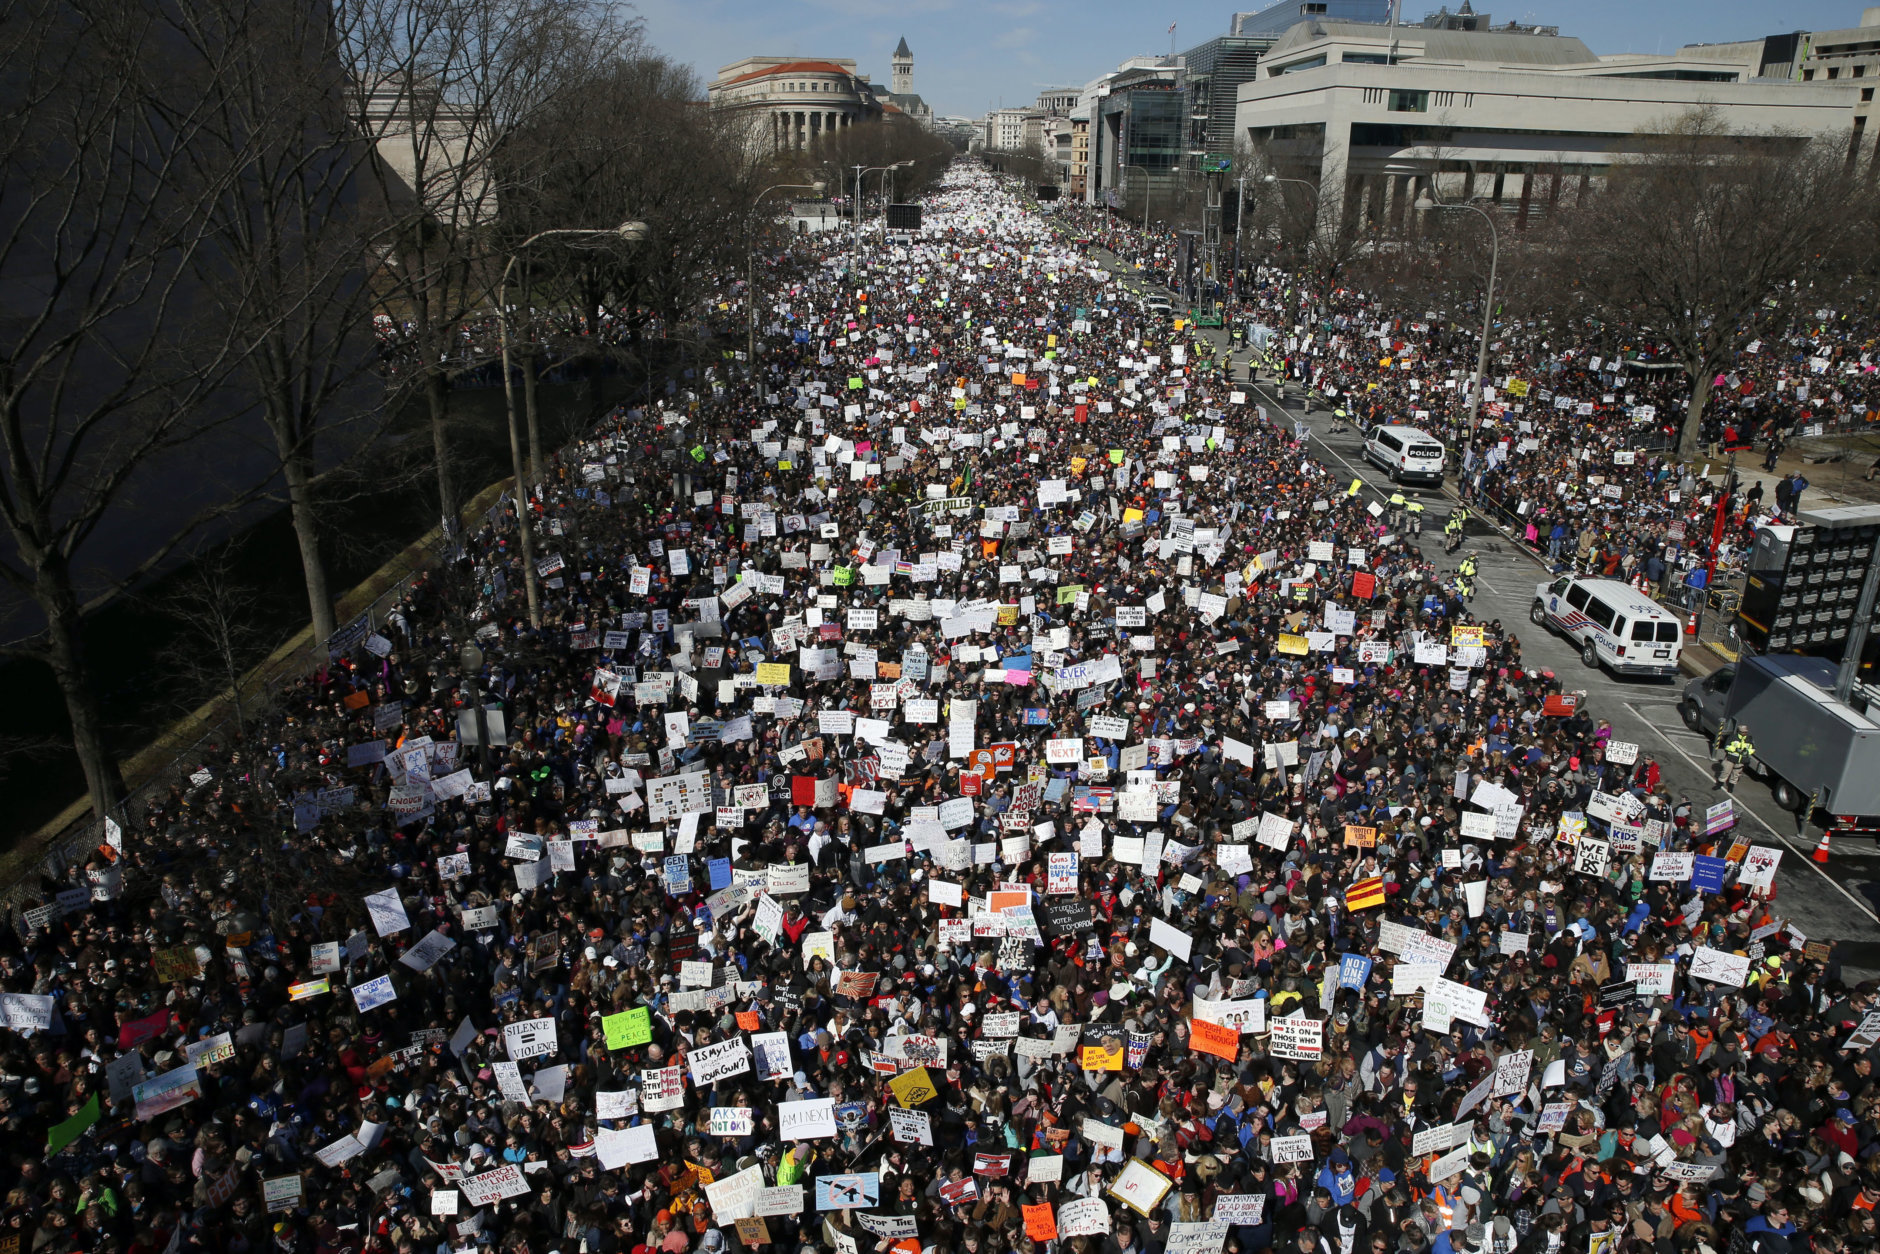 Looking west toward the White House, people fill Pennsylvania Avenue in Washington during the "March for Our Lives" rally in support of gun control on March 24, 2018. The rally was organized following the mass shooting that killed 17 people at Marjory Stoneman Douglas High School in Parkland, Fla., on Feb. 14. (AP Photo/Alex Brandon)